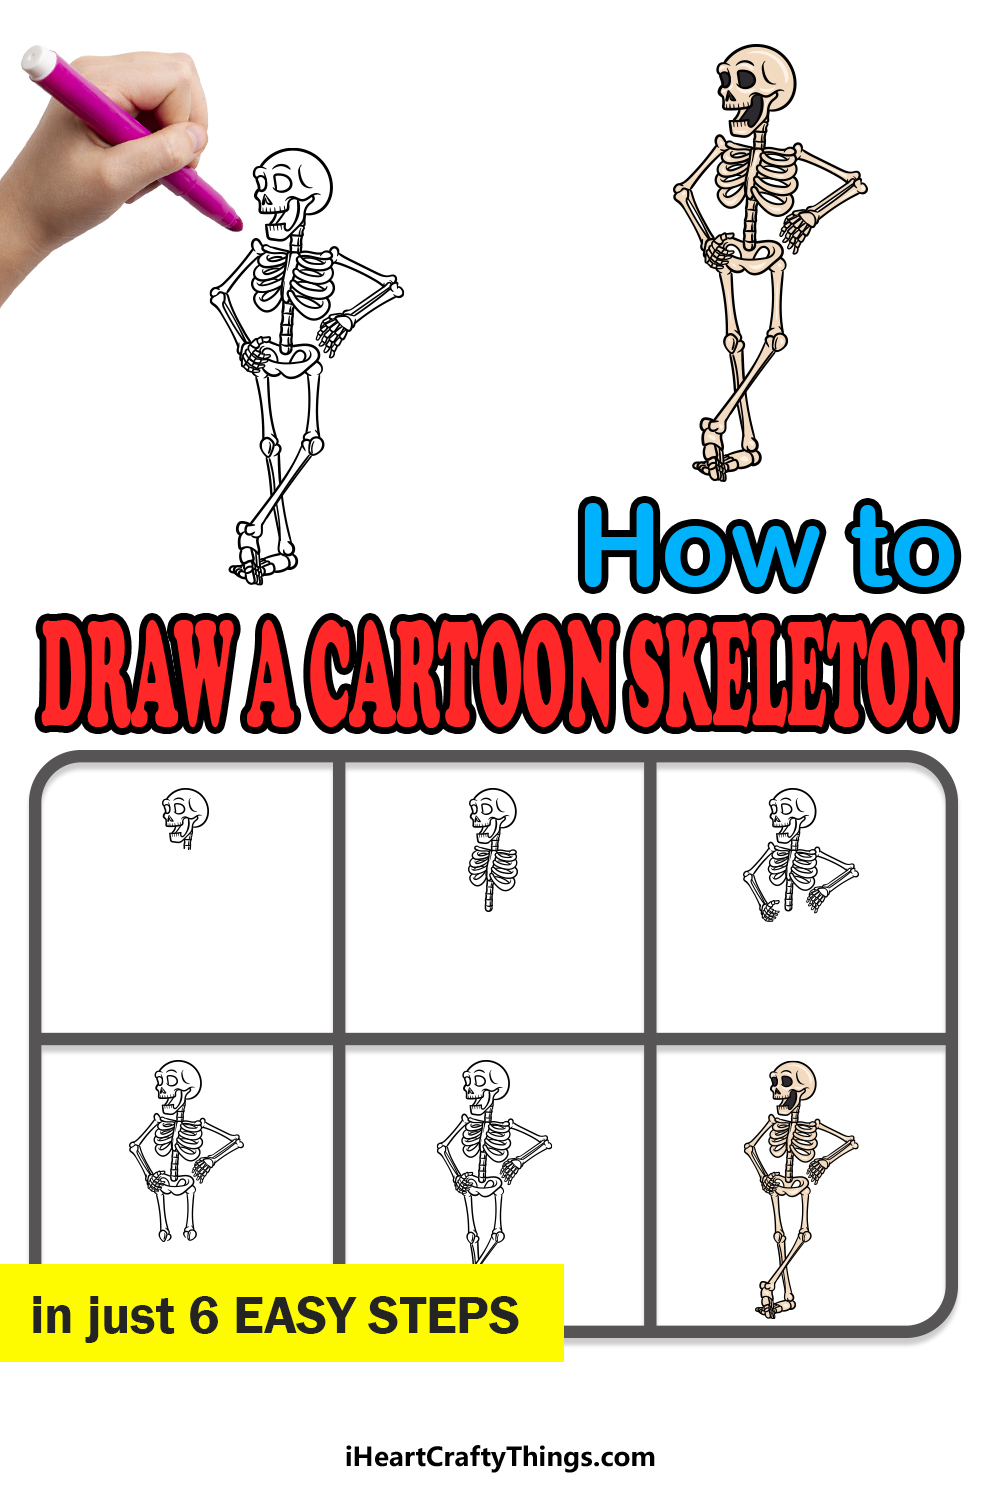 how to draw a Cartoon Skeleton in 6 easy steps